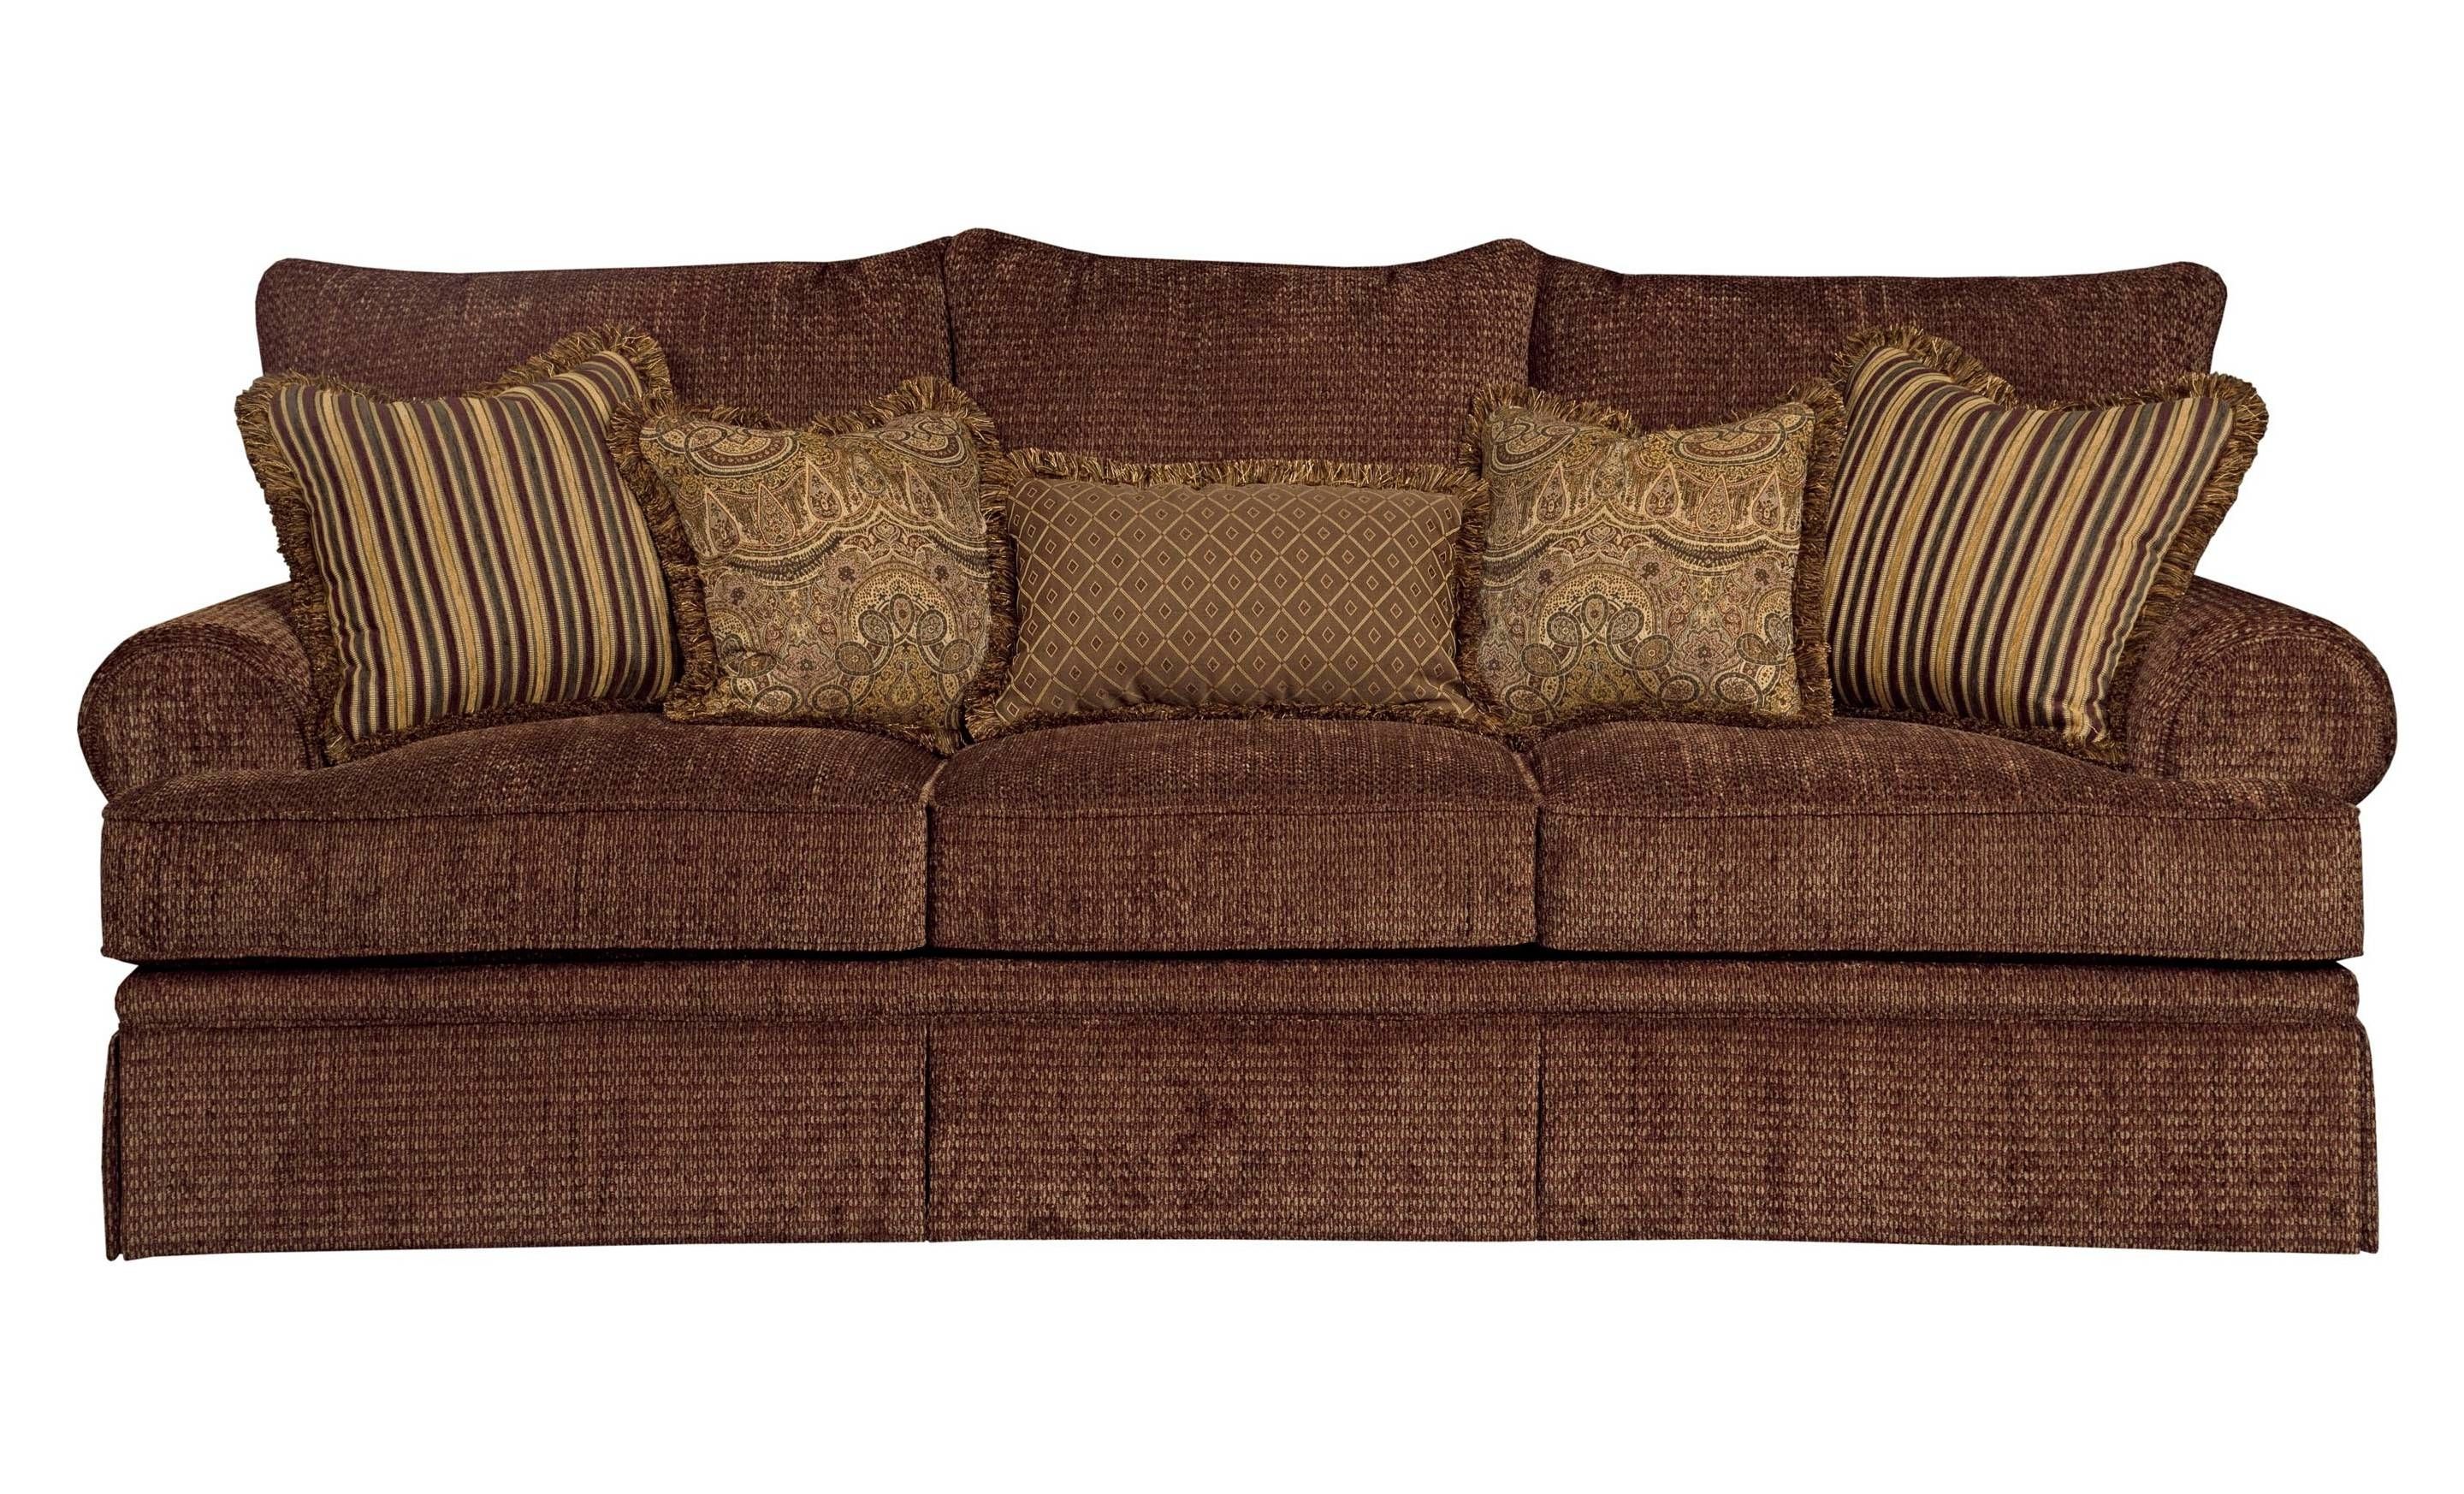 Broyhill Sofa Cambridge Where Is Broyhill Bedroom Furniture Made With Broyhill Emily Sofas 